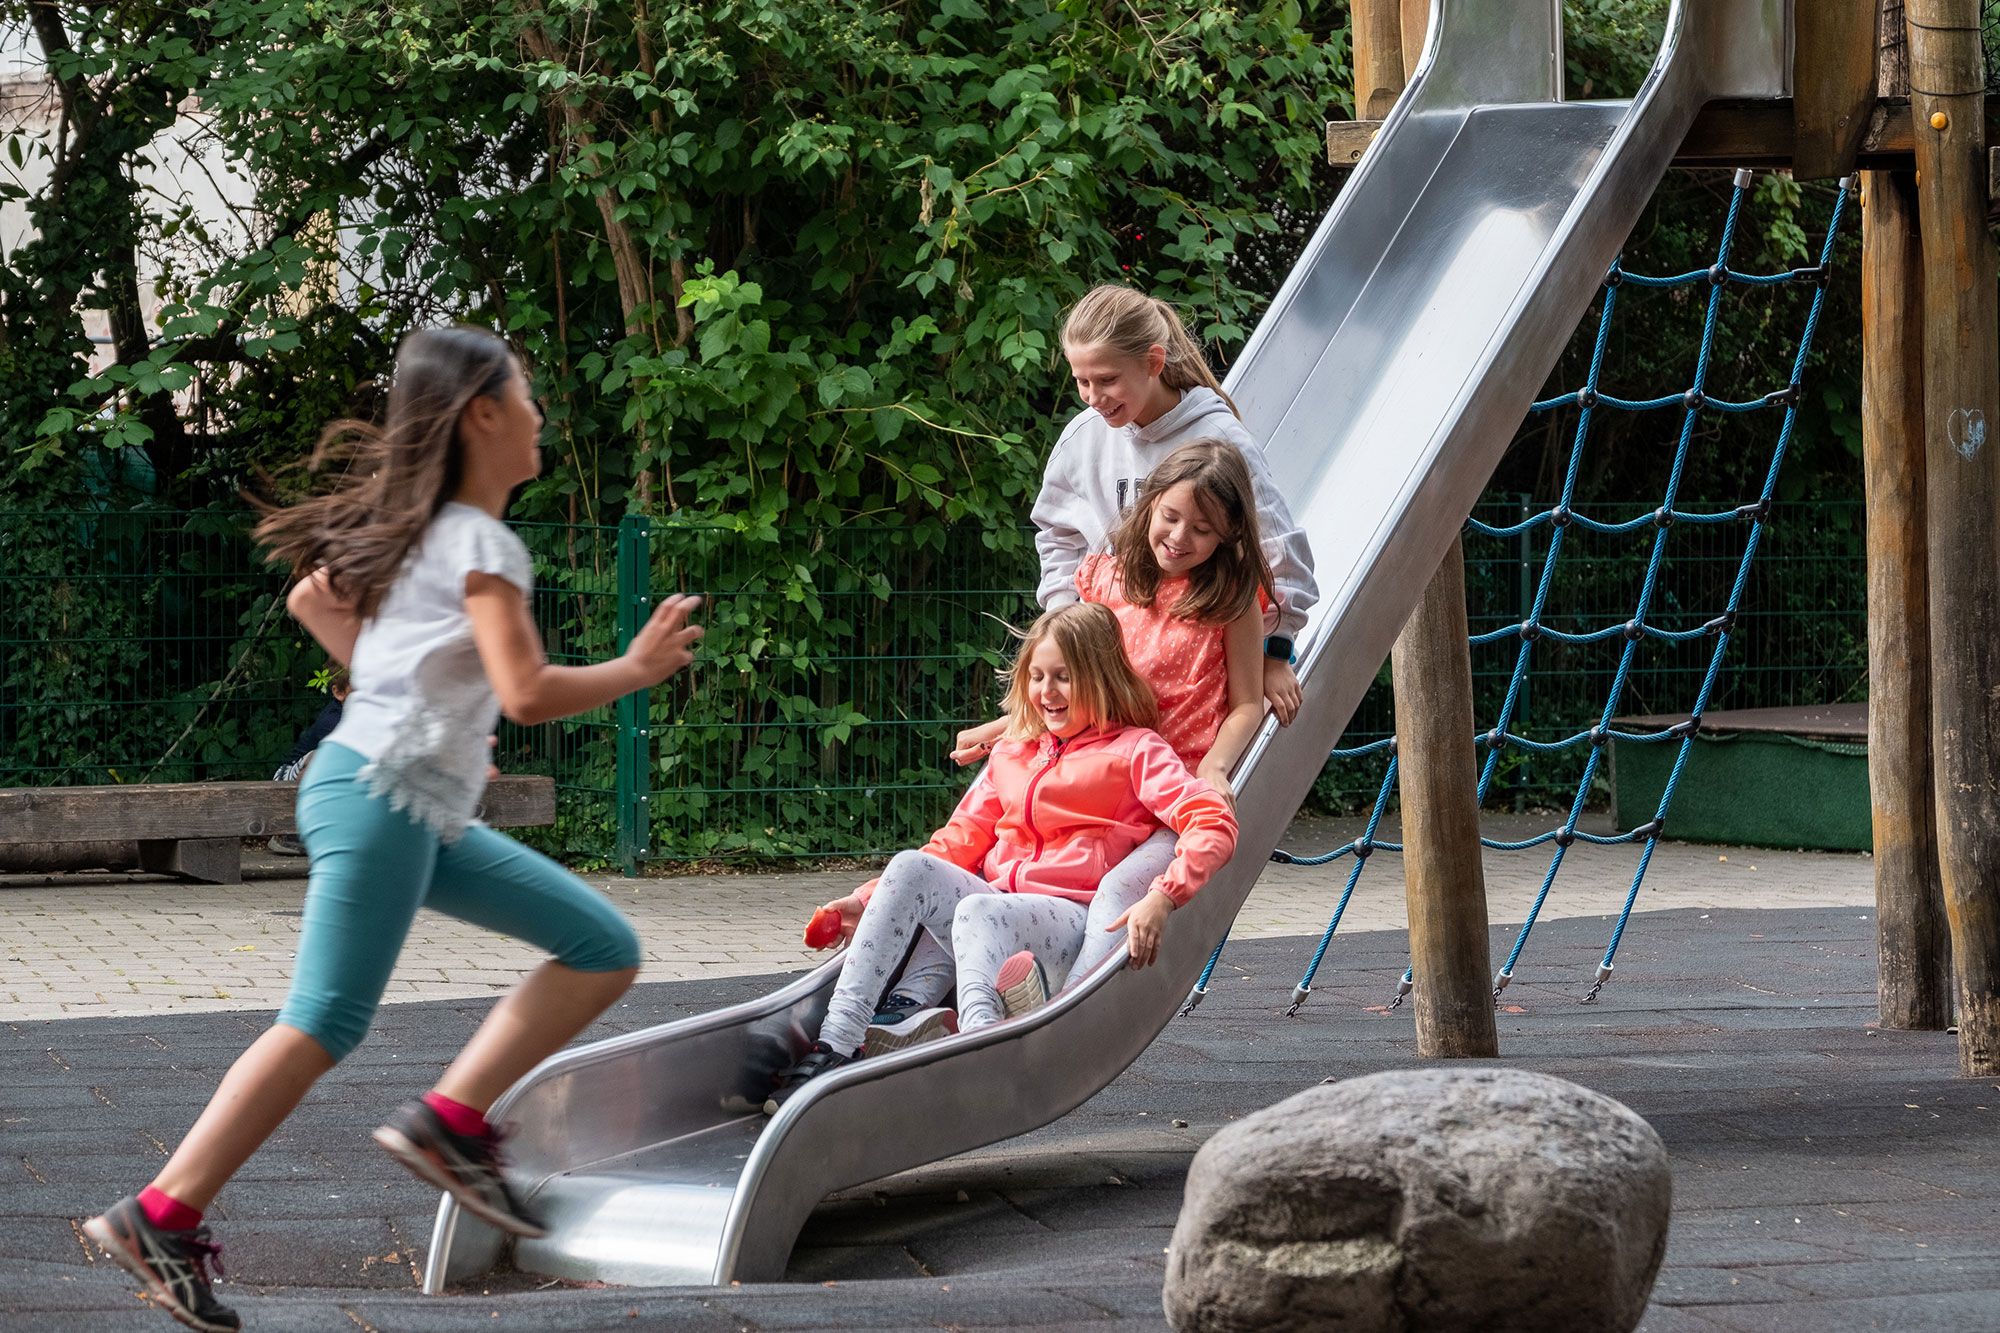 Four primary school girls are outside at the playground. Three girls are on the slide together and one girl is running. 	